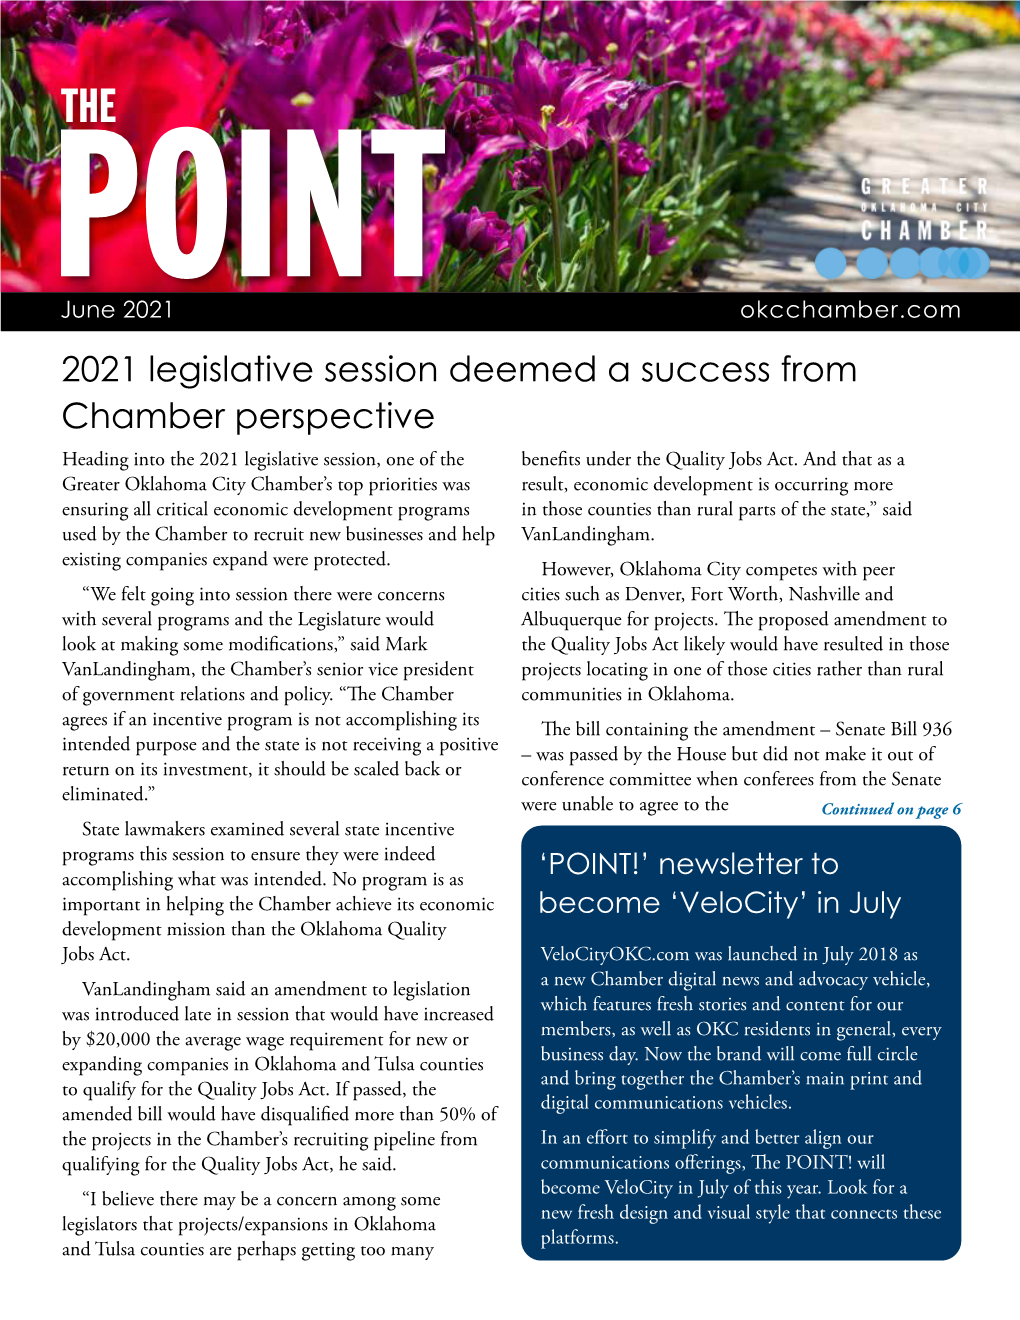 2021 Legislative Session Deemed a Success from Chamber Perspective Heading Into the 2021 Legislative Session, One of the Benefits Under the Quality Jobs Act